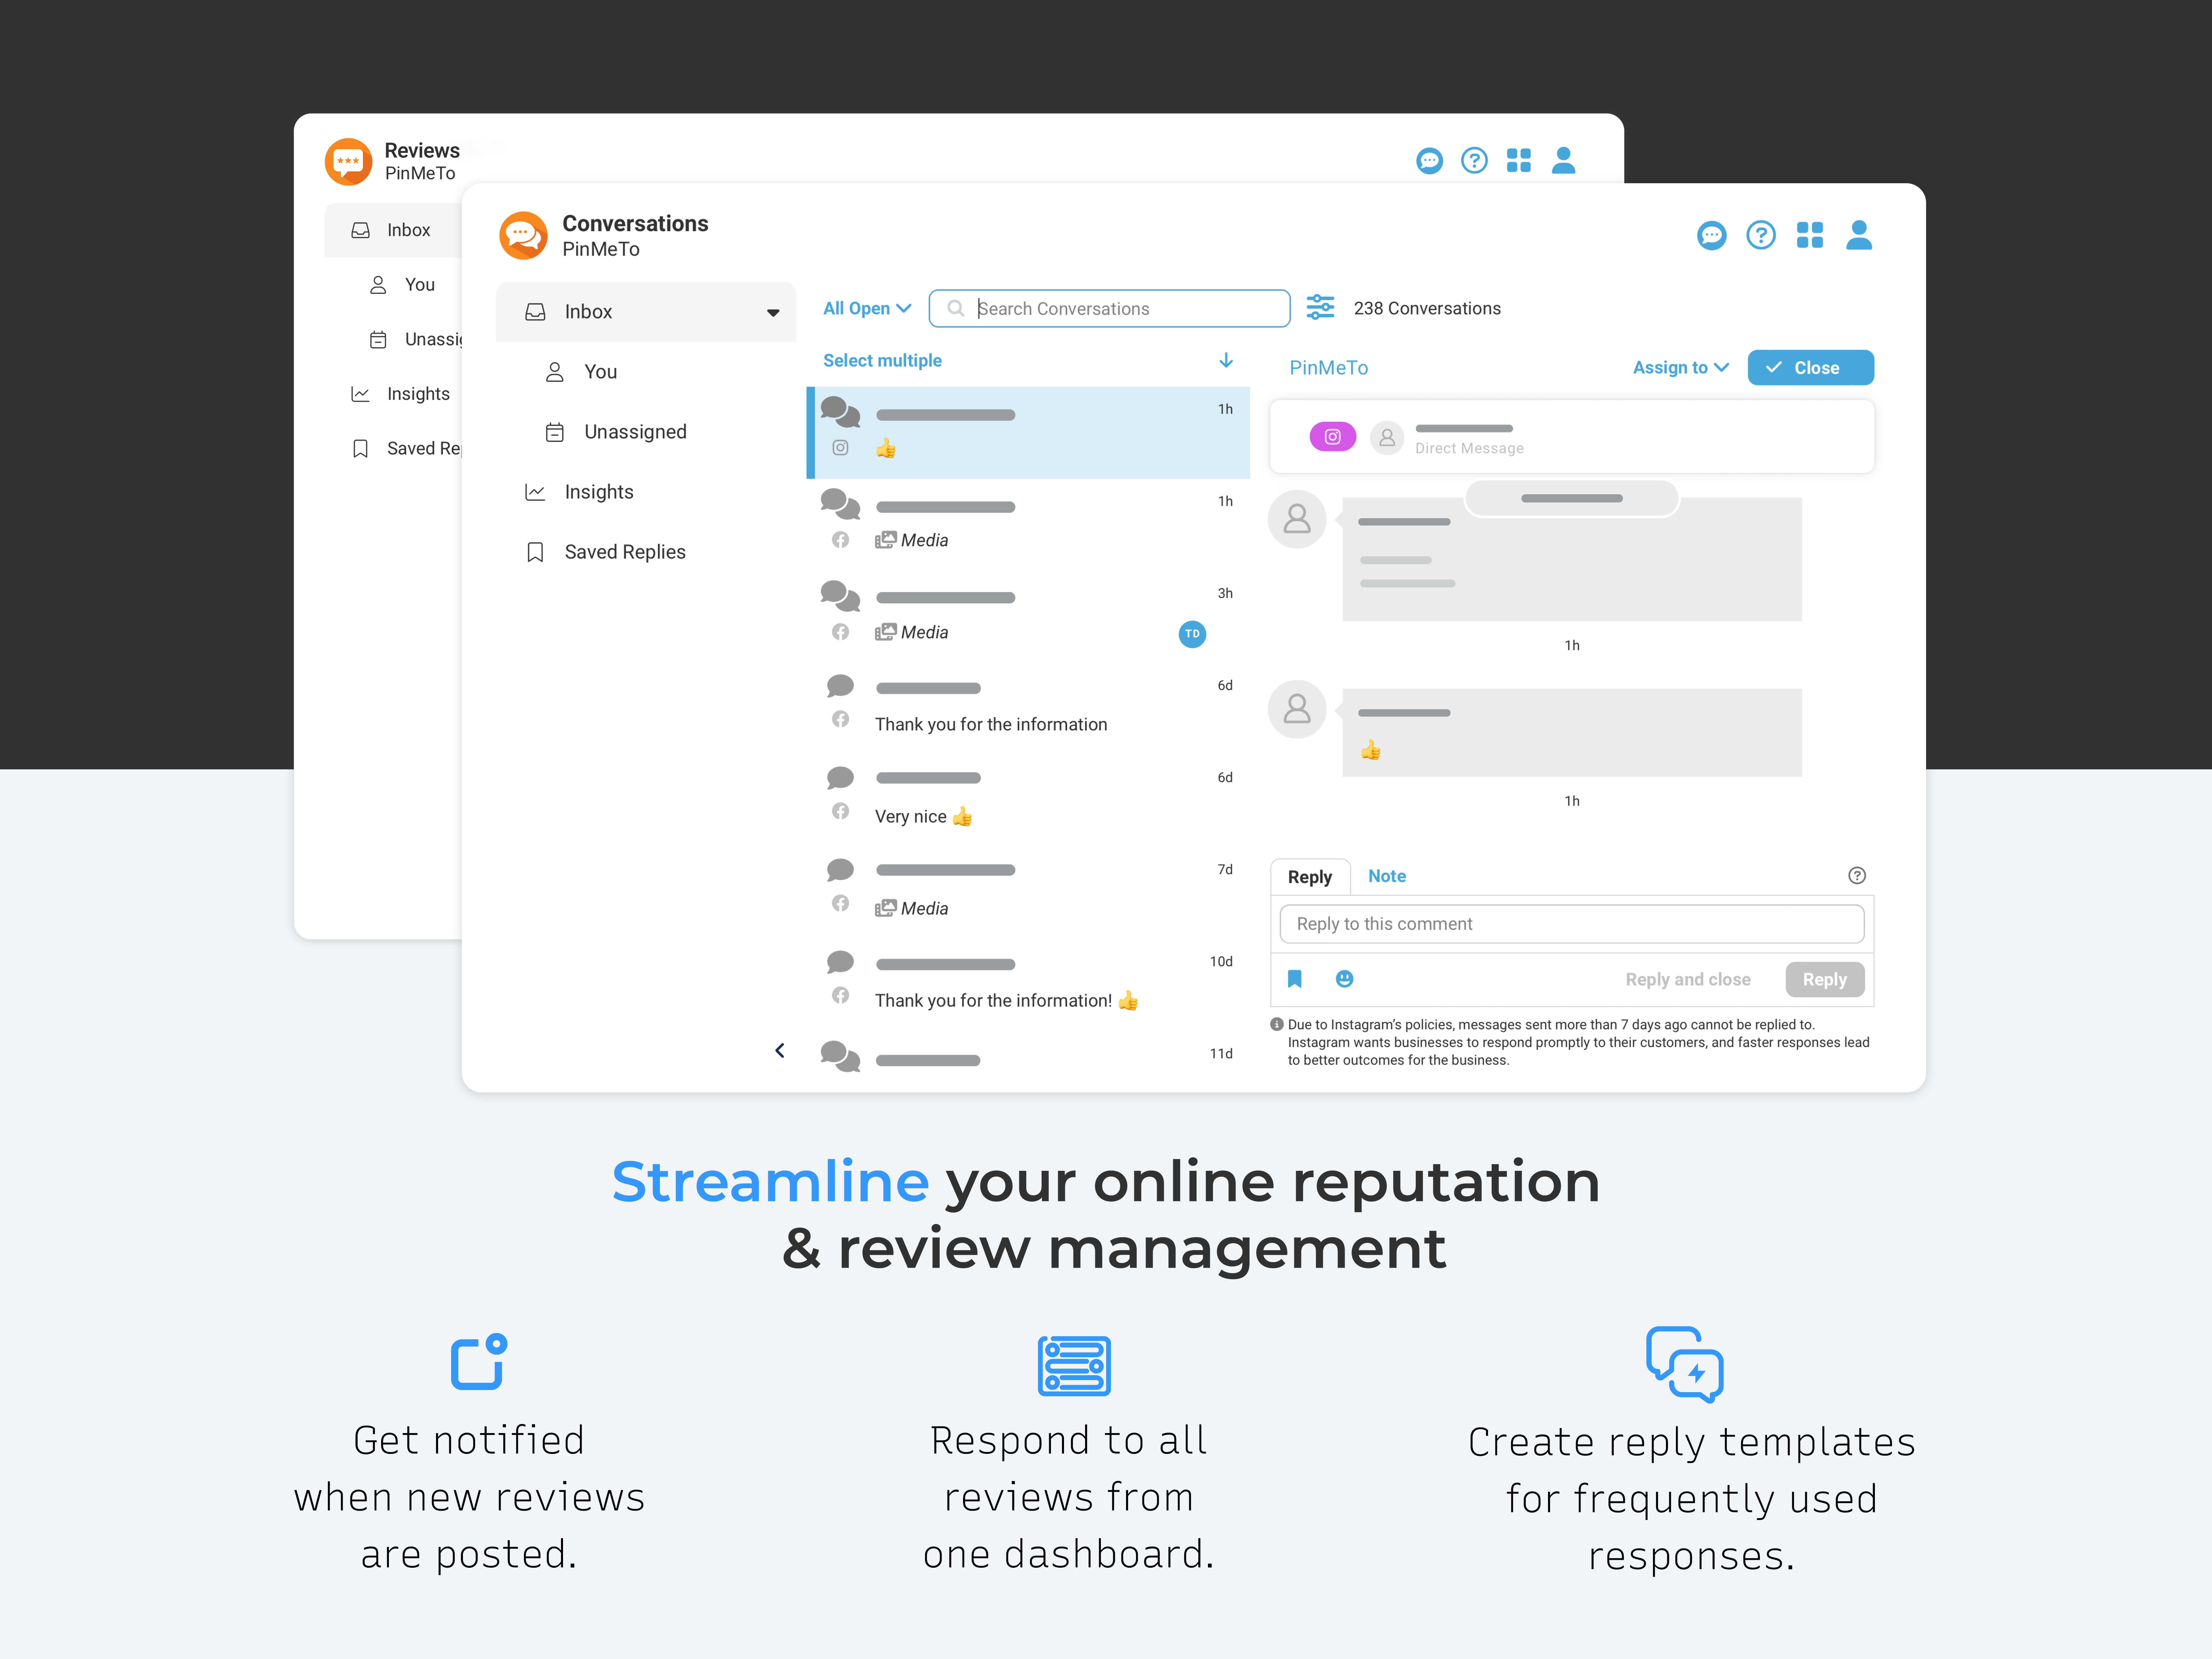 Monitor and respond to reviews and messages online